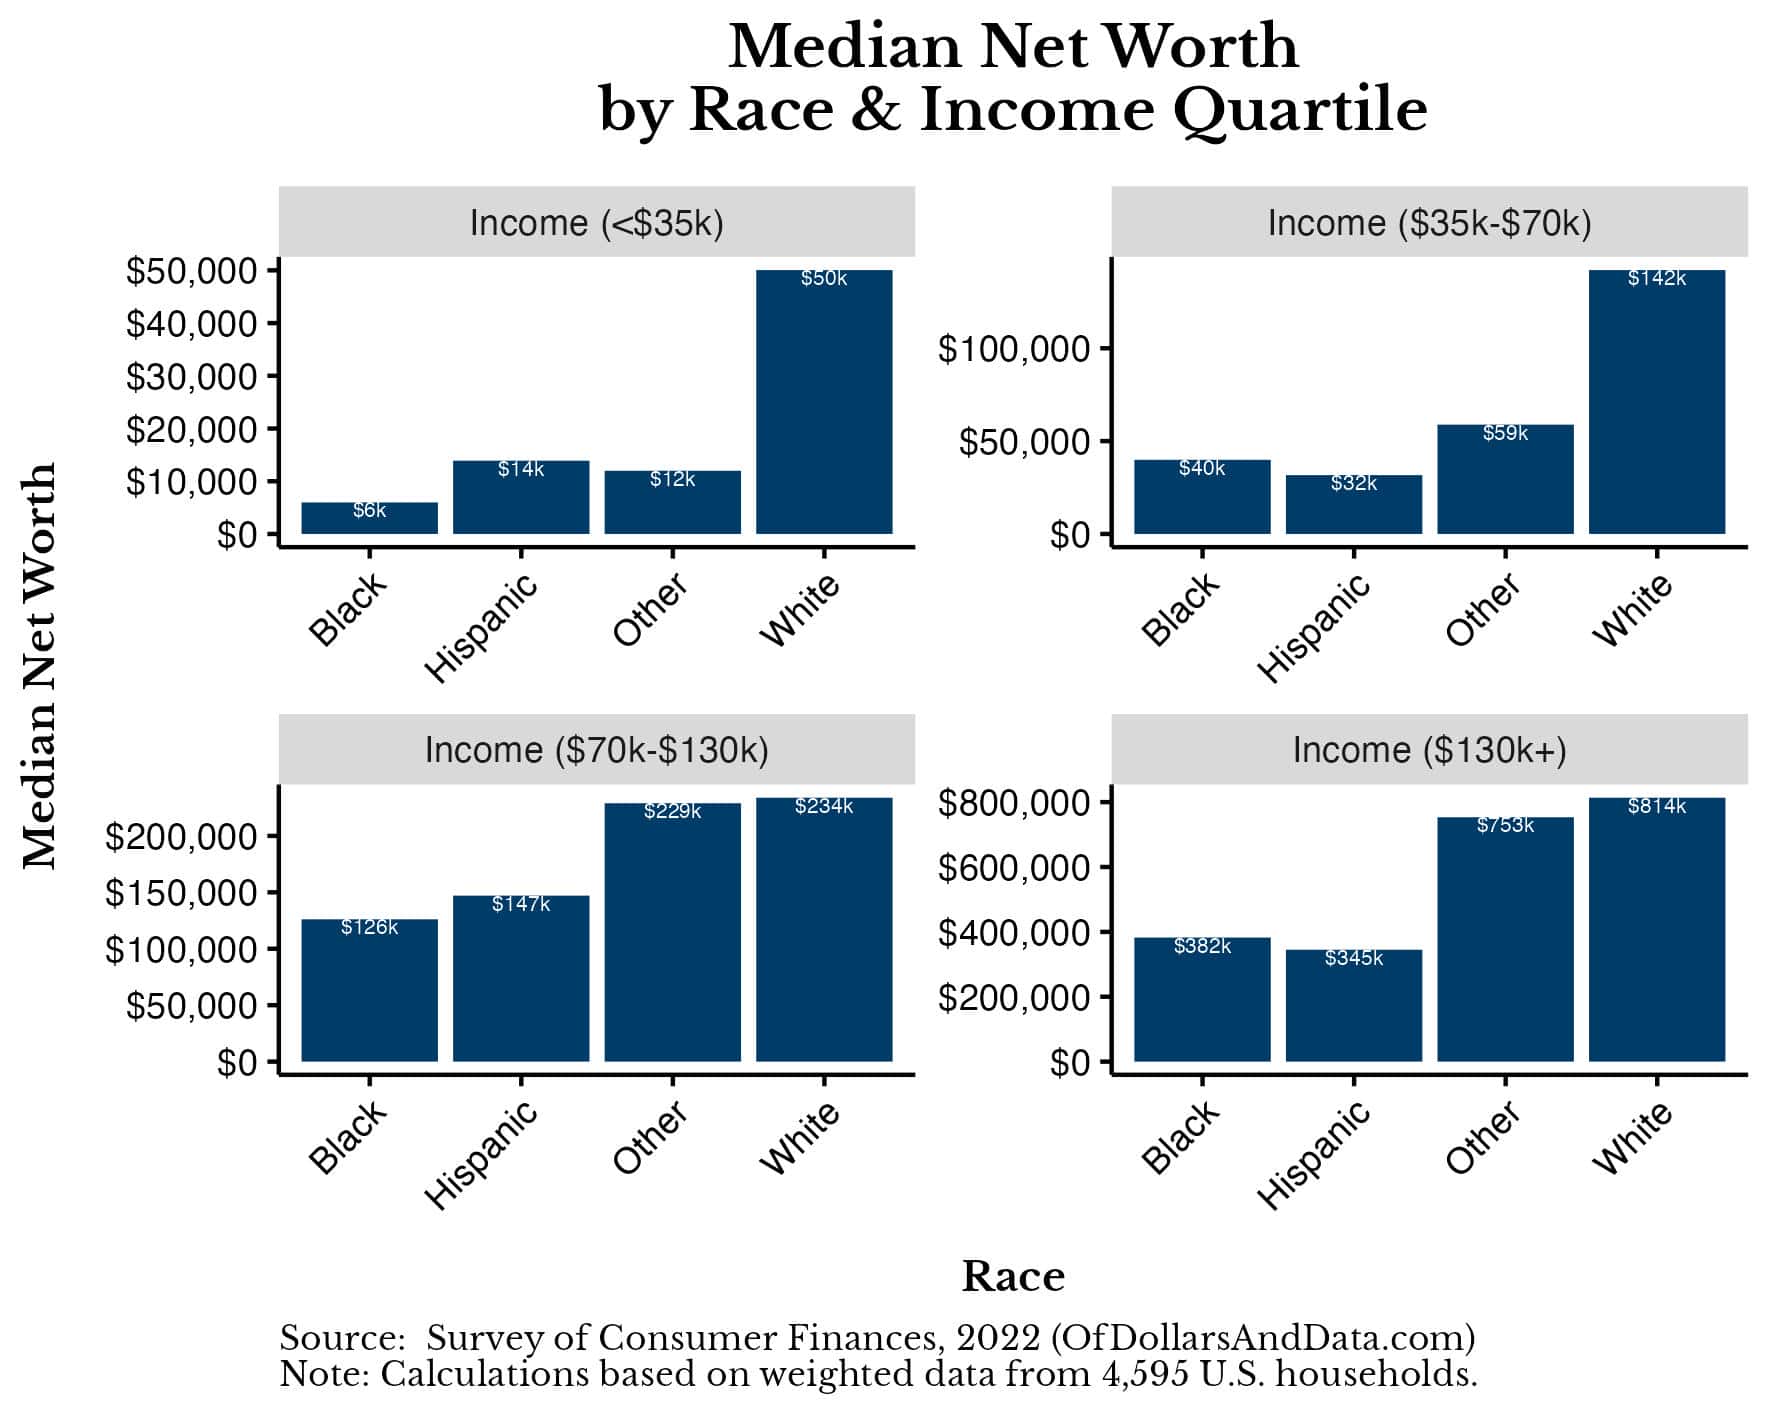 Chart showing the median net worth by race and income level for the 2022 Survey of Consumer Finances.